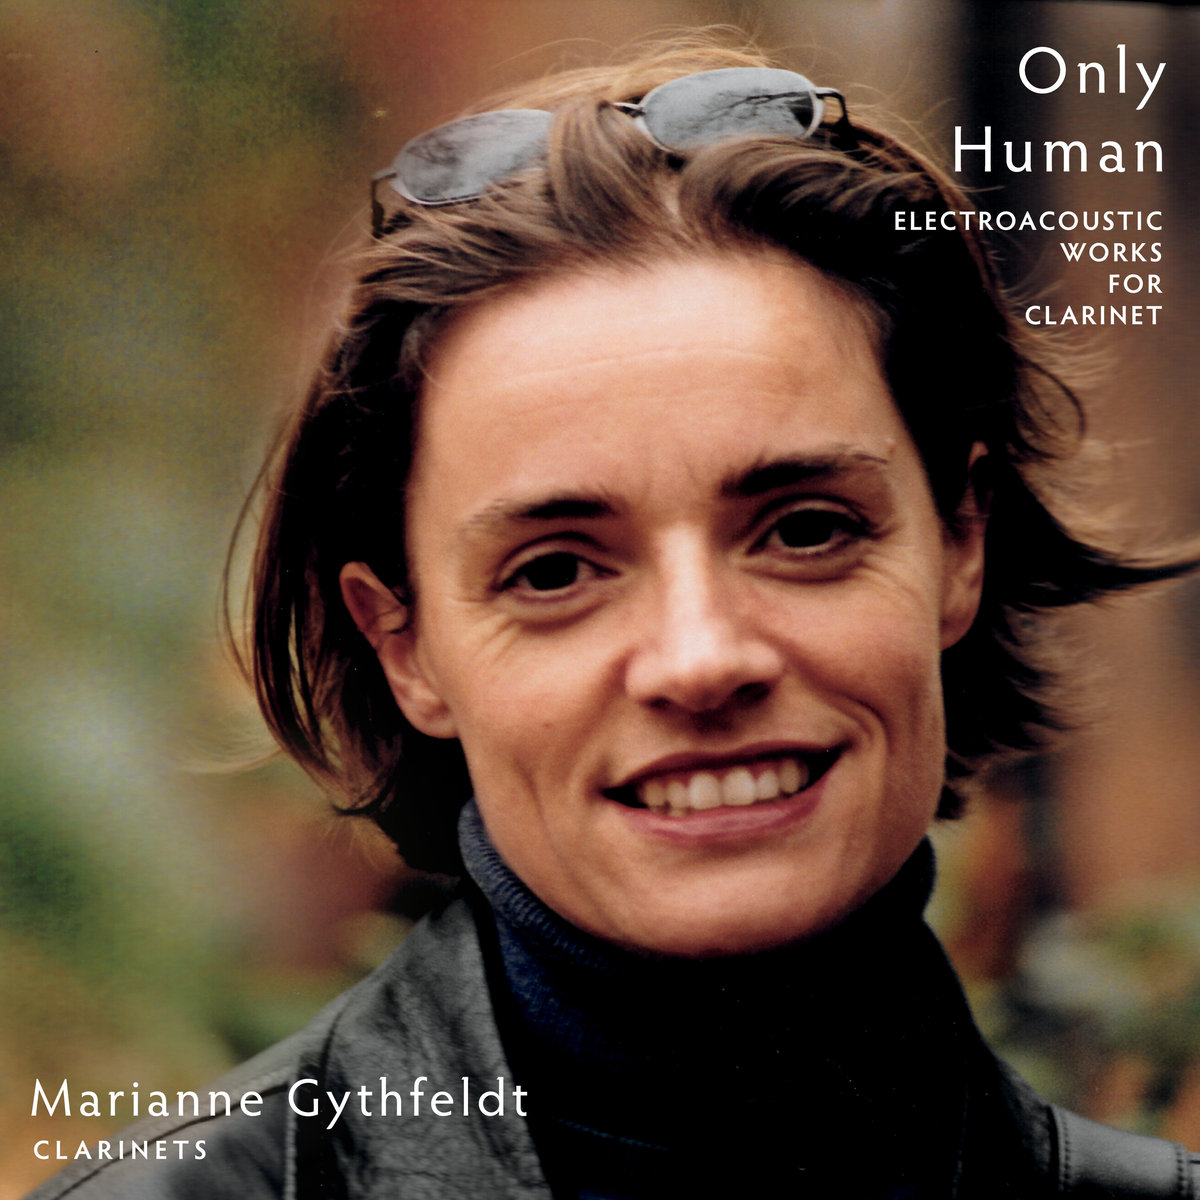 [Only Human CD cover]